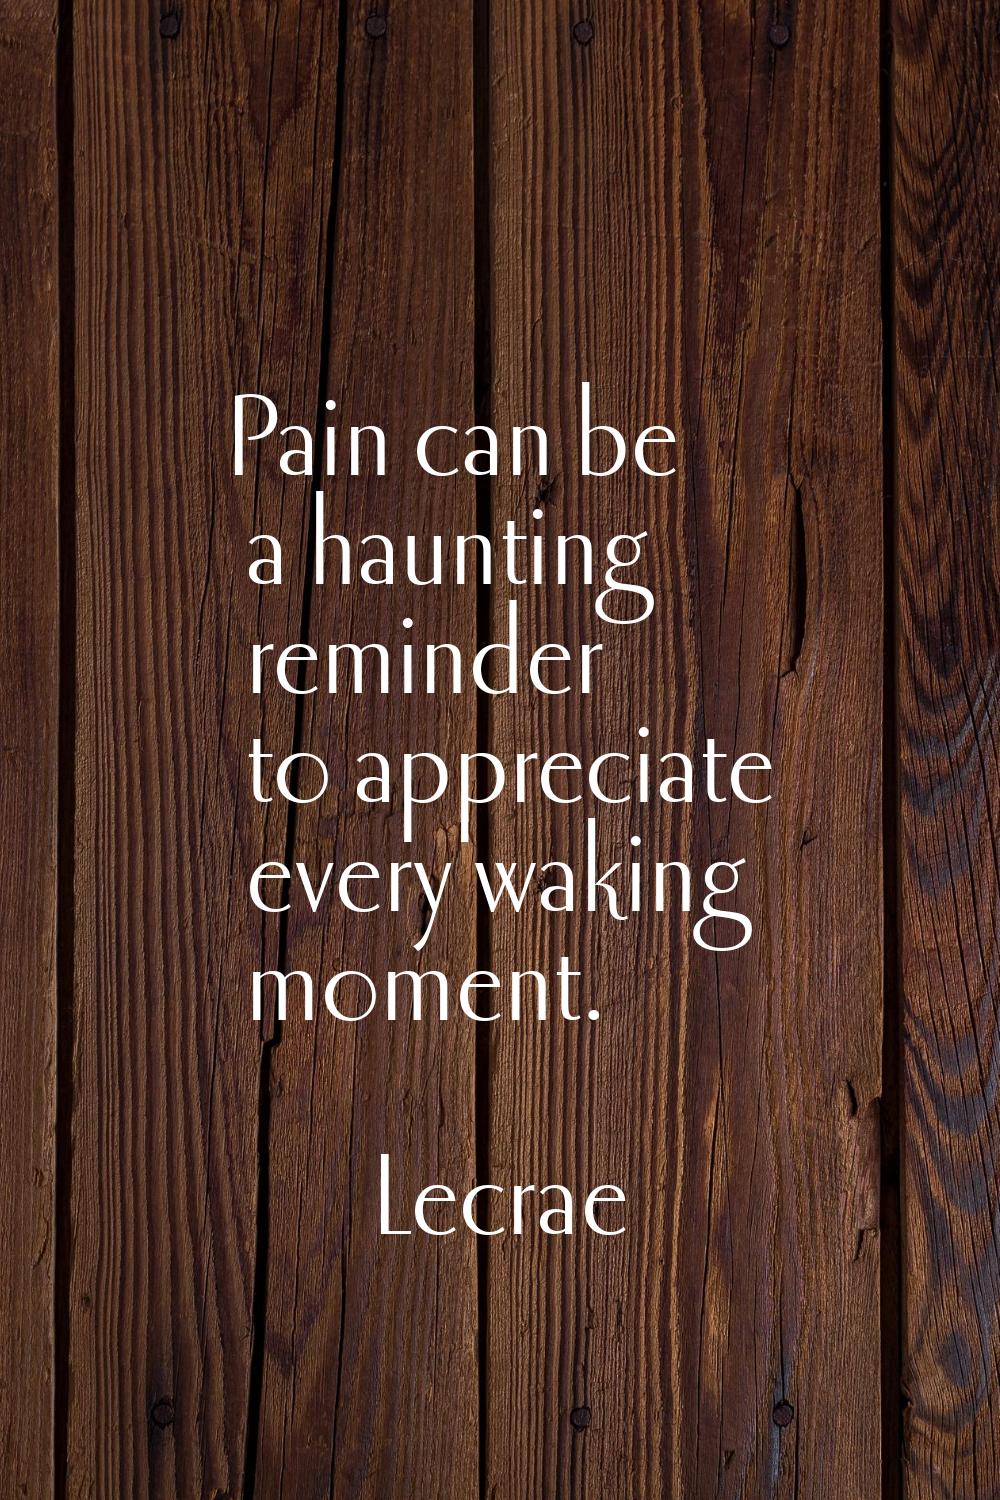 Pain can be a haunting reminder to appreciate every waking moment.